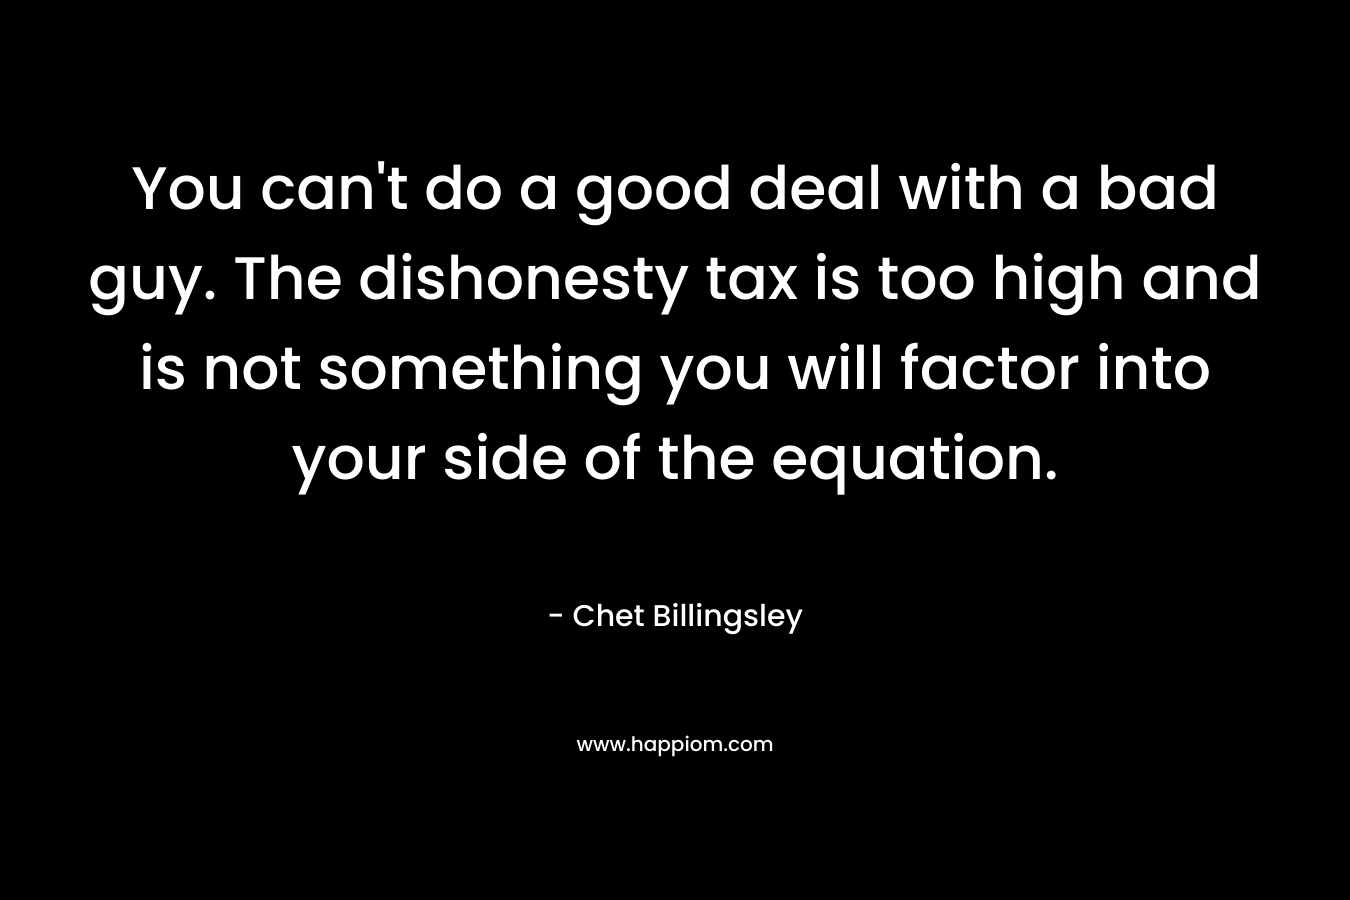 You can’t do a good deal with a bad guy. The dishonesty tax is too high and is not something you will factor into your side of the equation. – Chet Billingsley